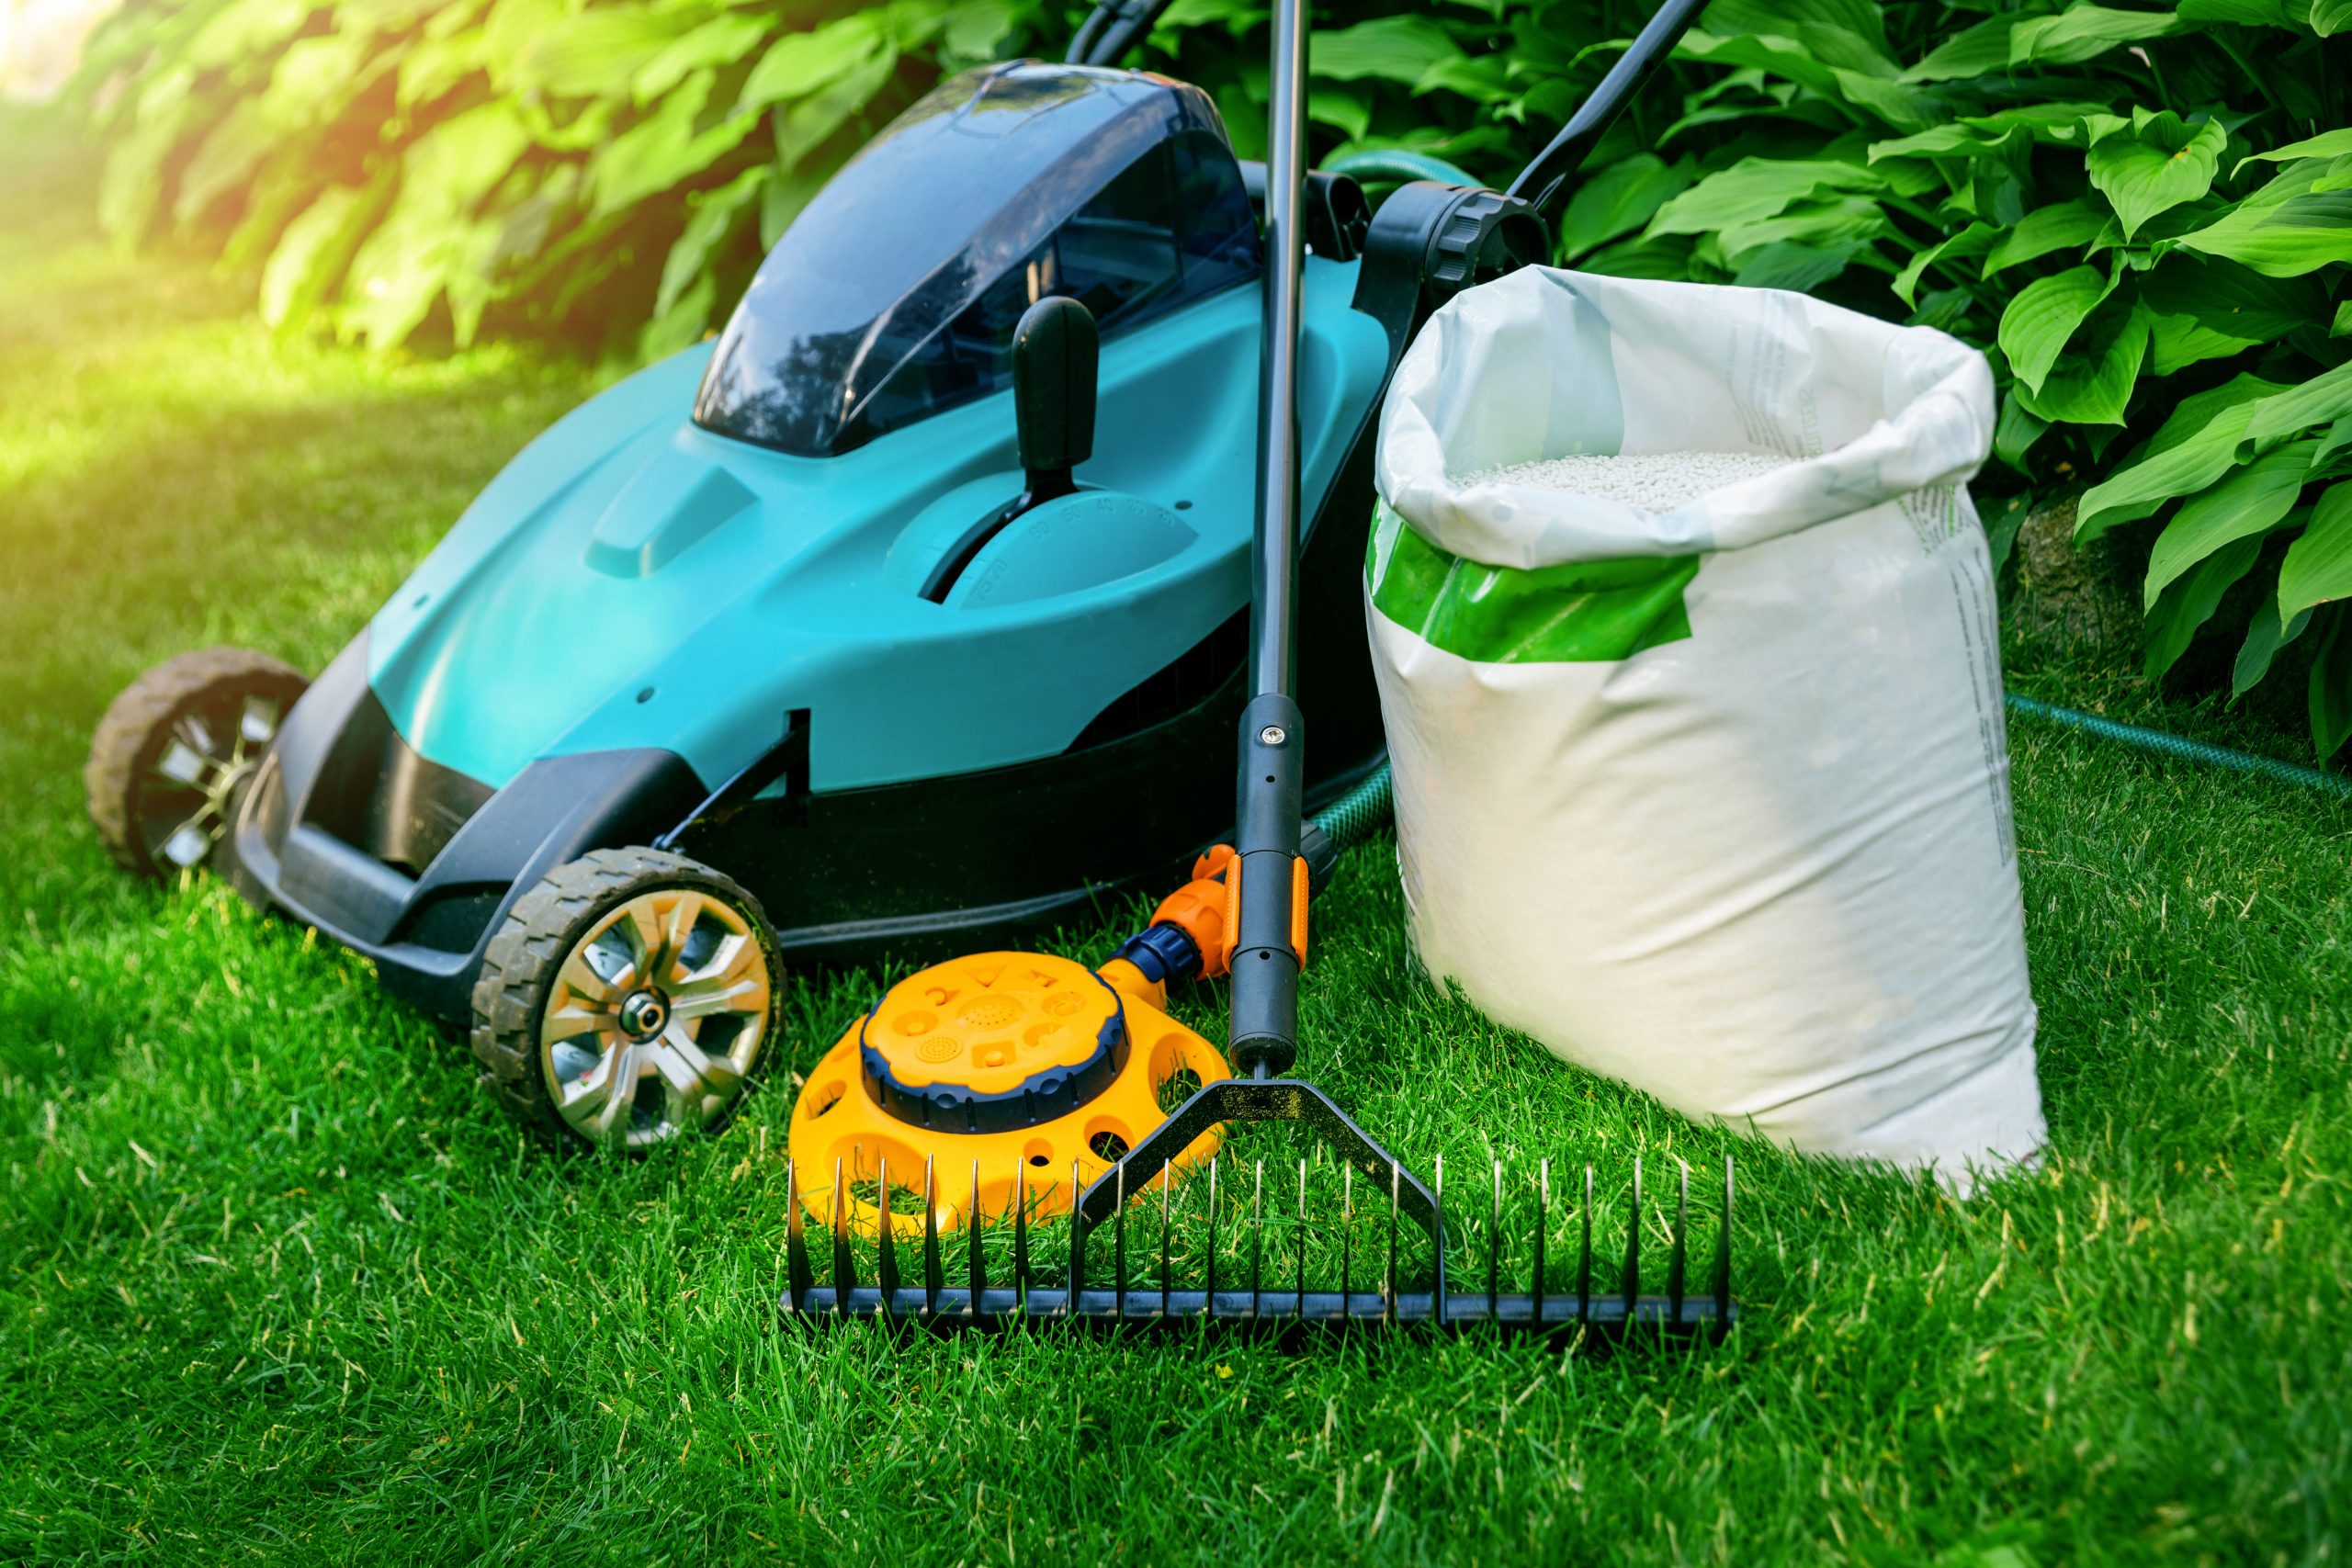 September Lawn Care Tips from Your Ace Hardware